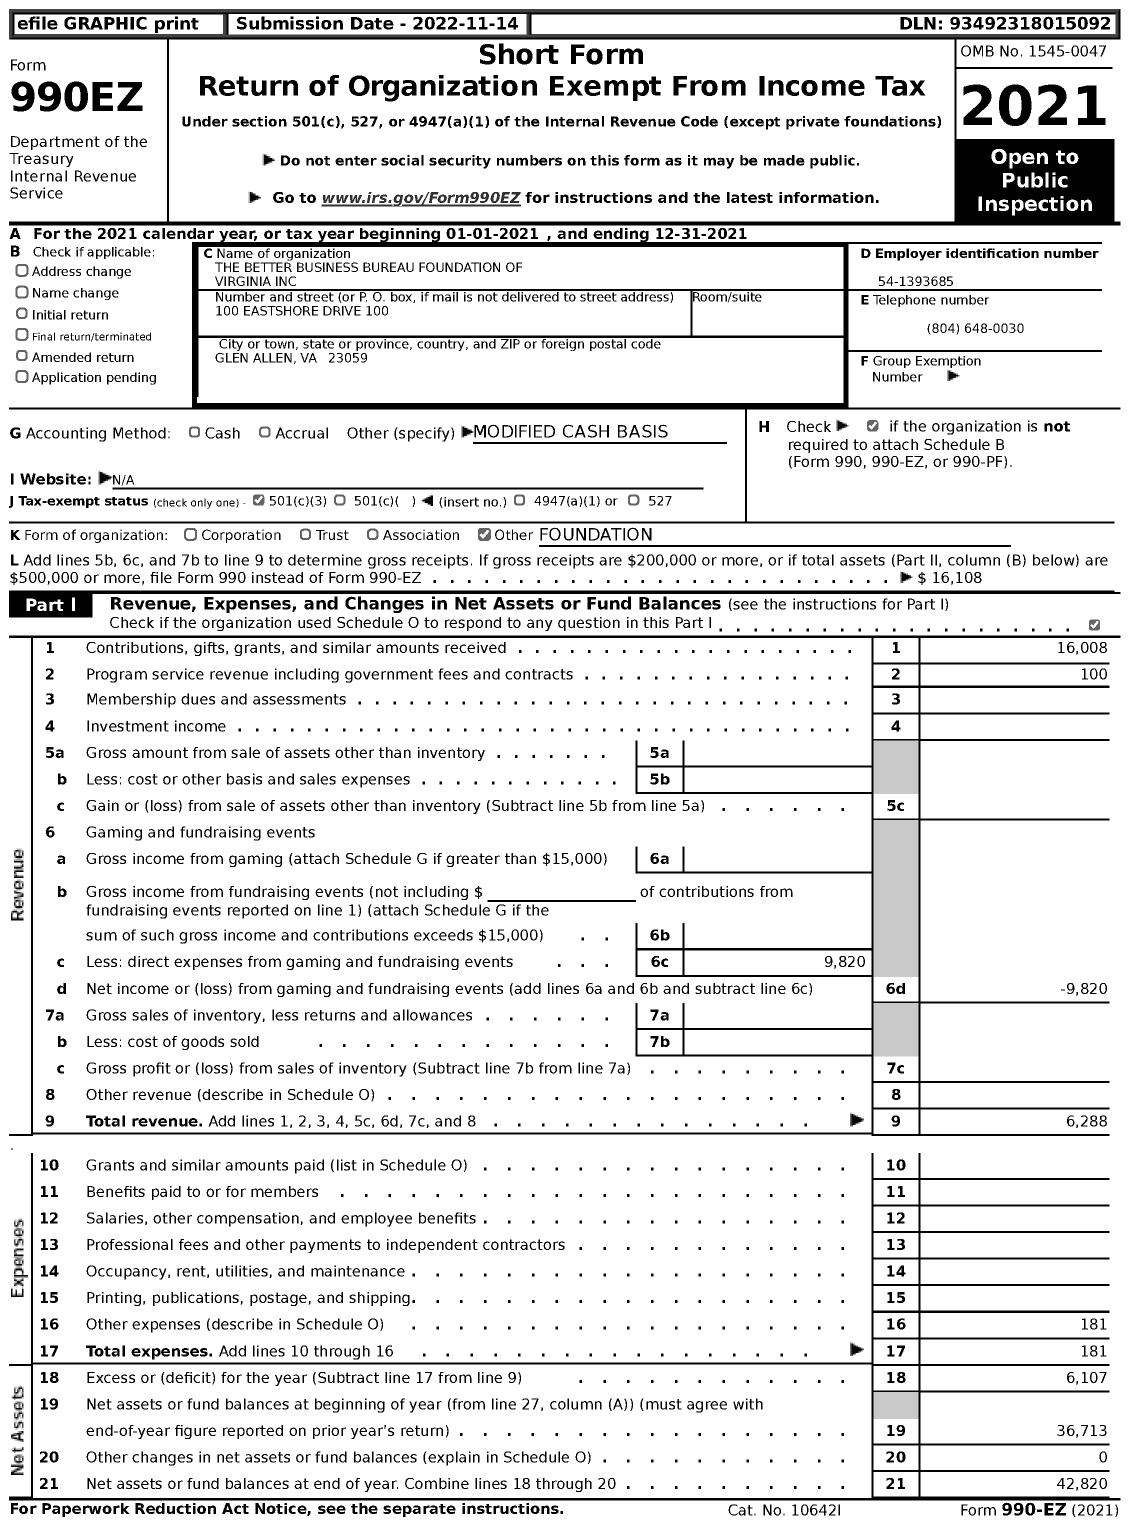 Image of first page of 2021 Form 990EZ for The Better Business Bureau Foundation of Virginia